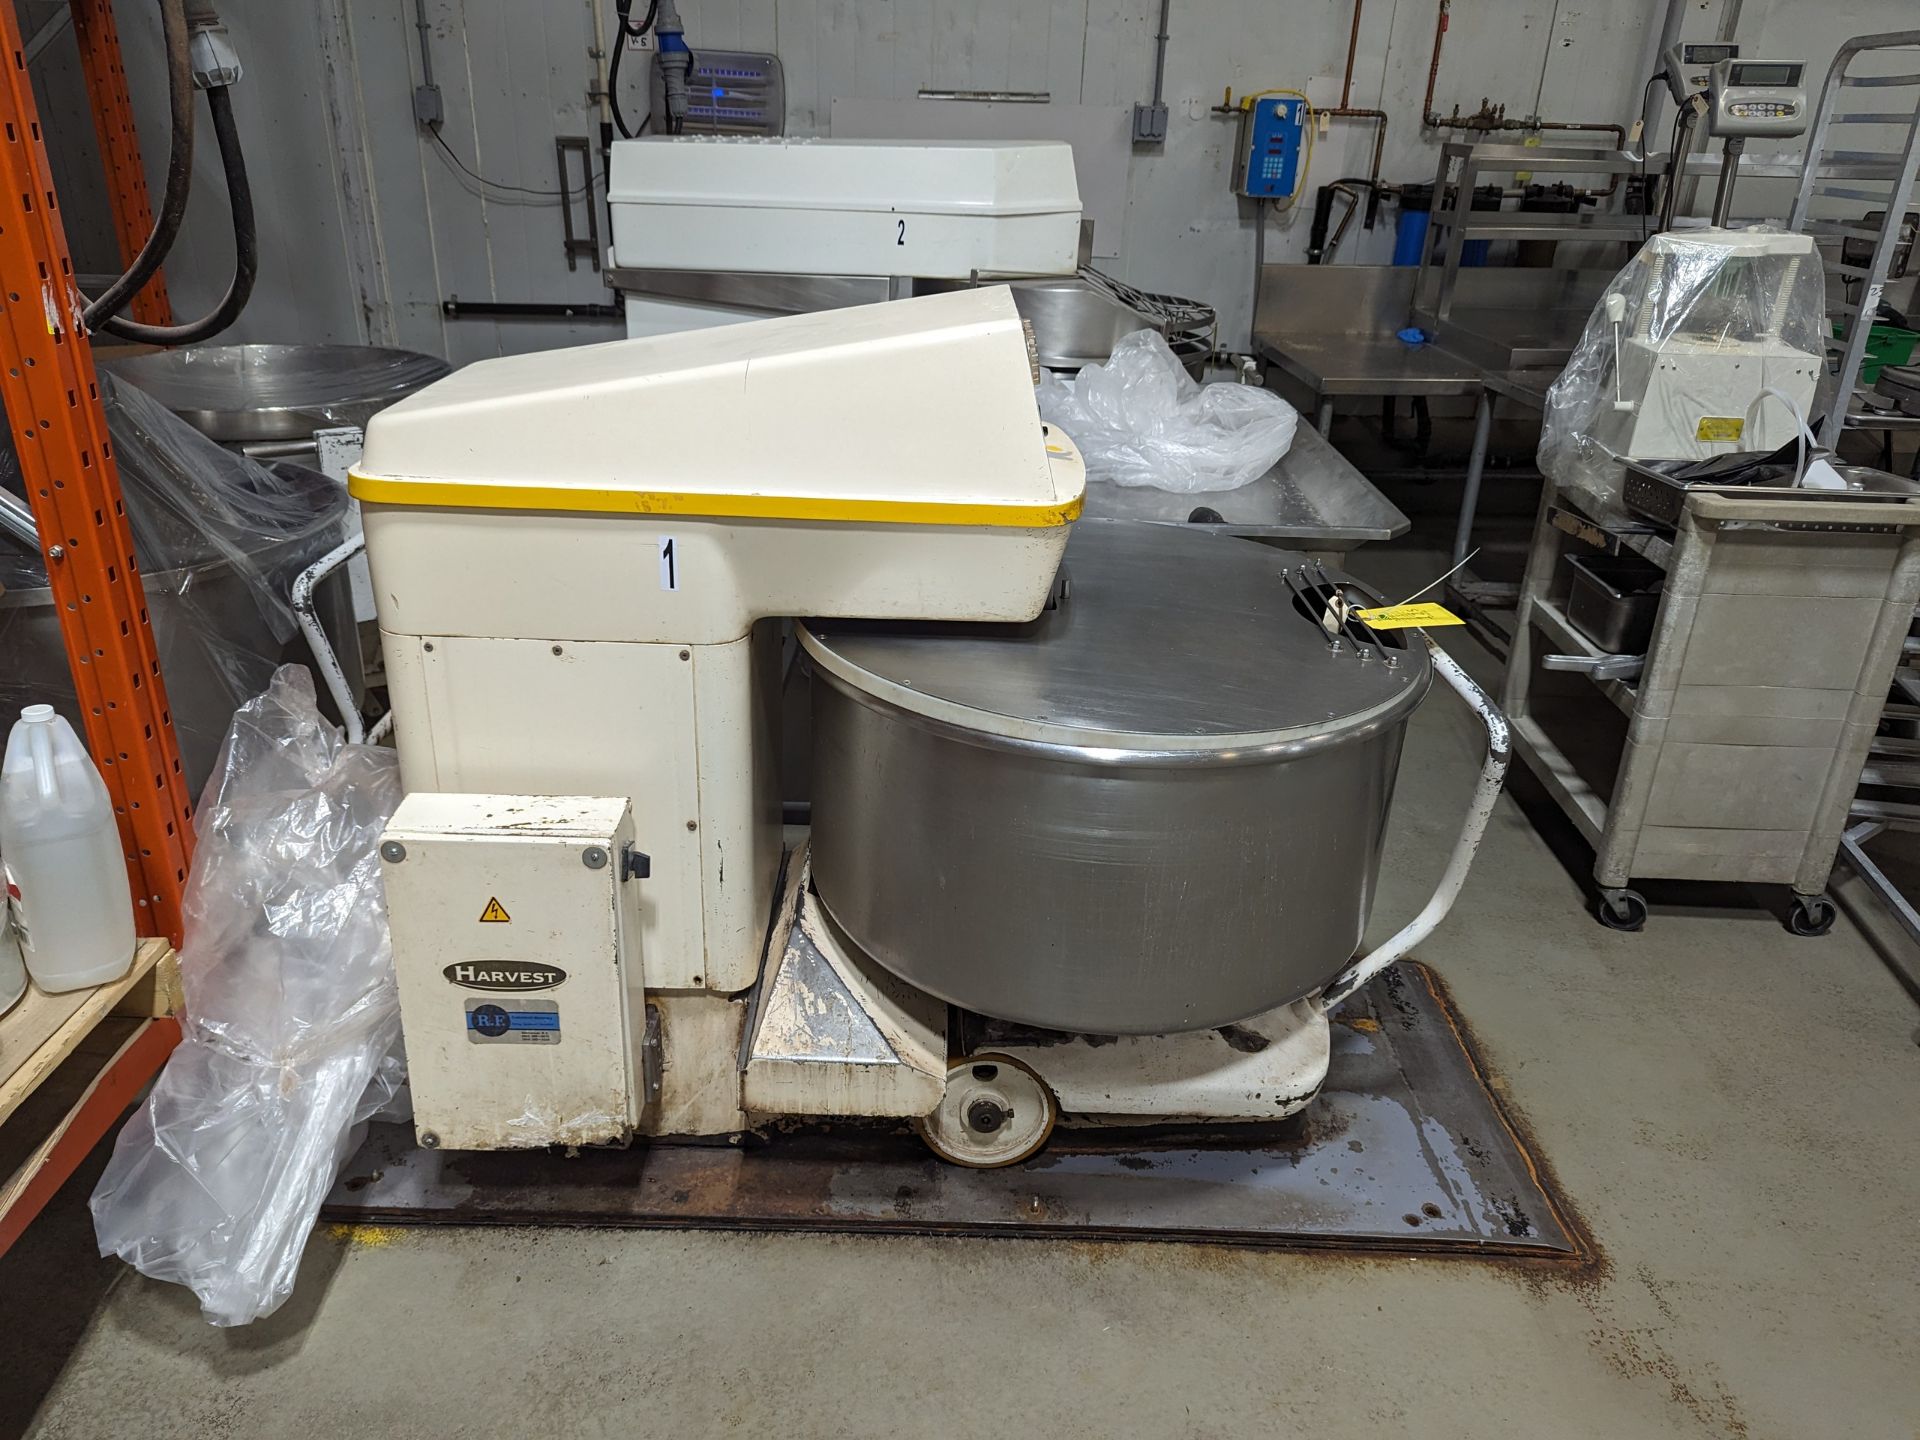 Kemper ST125A Spiral Mixer with 2 Bowls, Dimensions LxWxH: 62x37x54 - Image 2 of 6